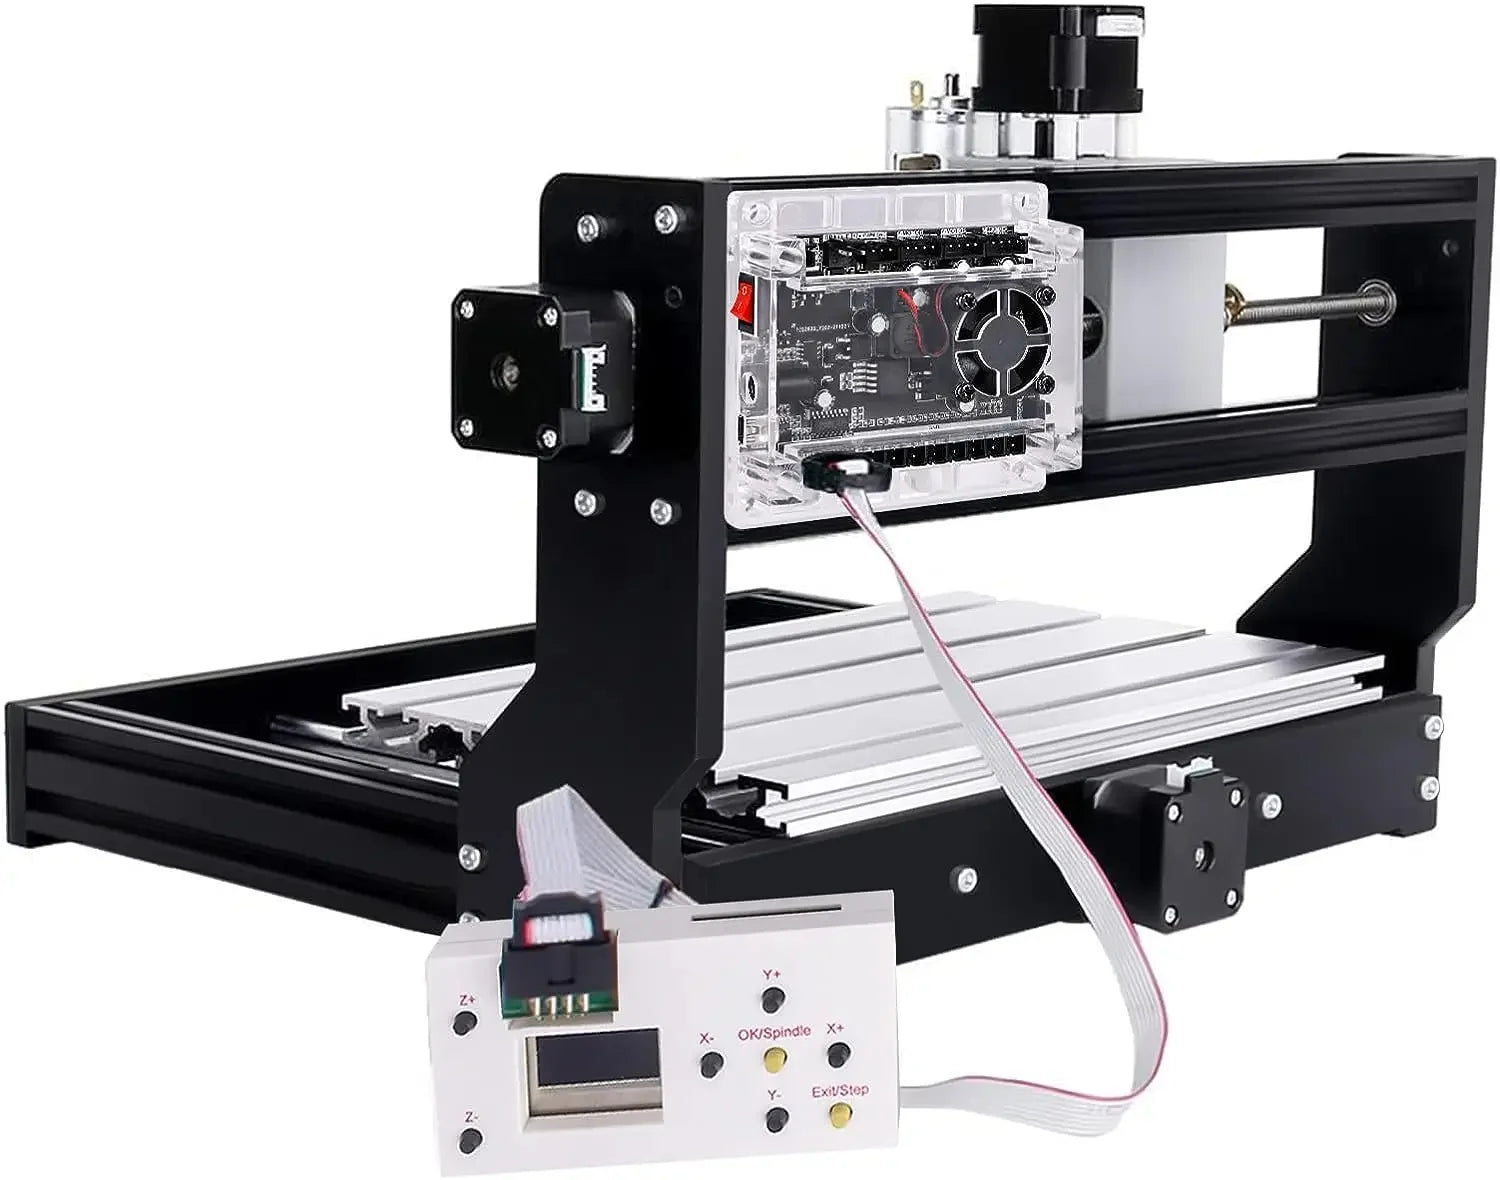 CNC 3018 Pro Laser Engraver Woodworking  3 Axis CNC Engraving Machine Control Board grbl 1.1f USB Port